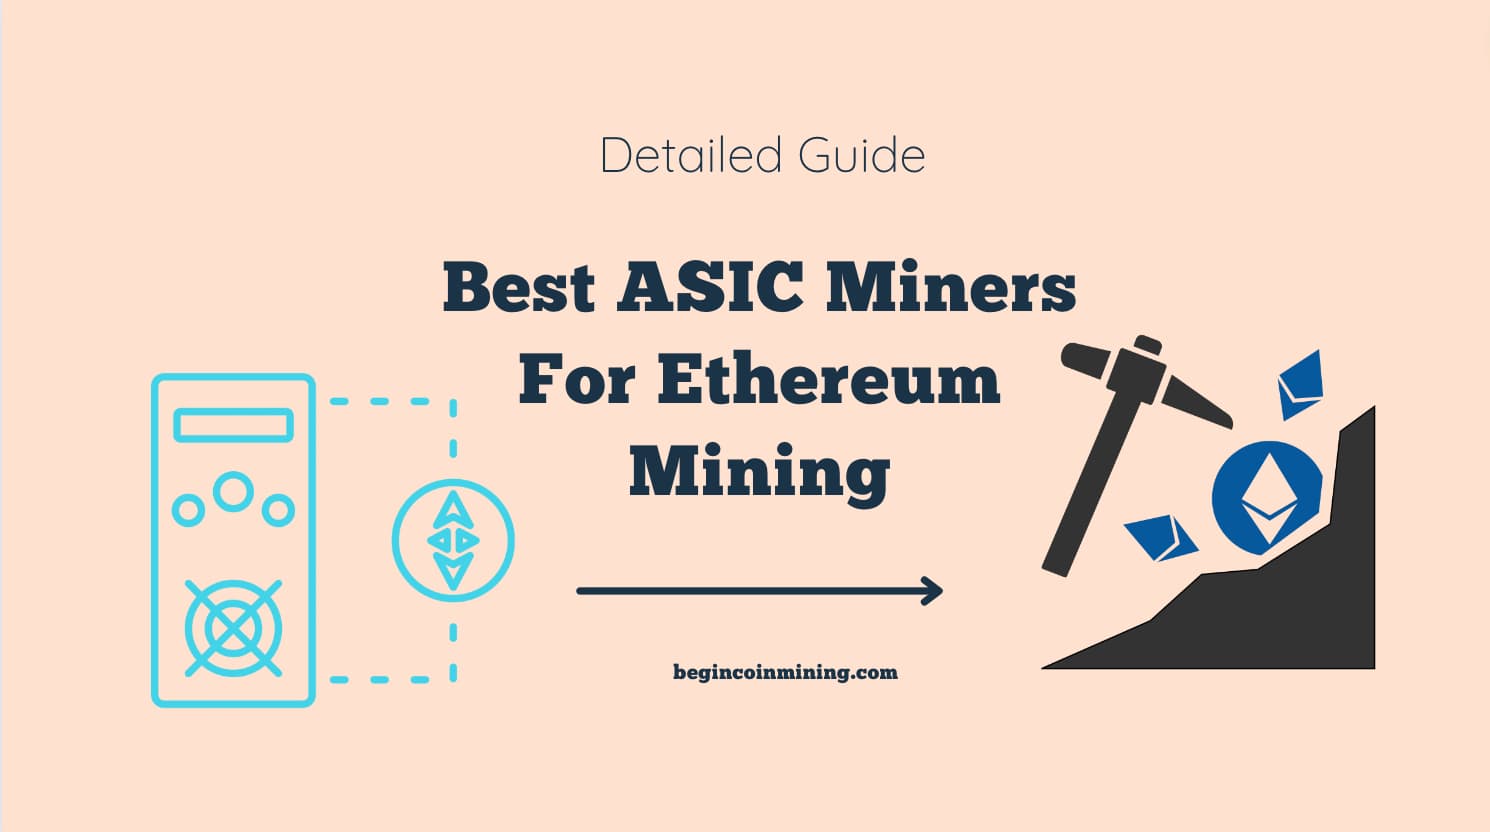 Best ASIC Miners For Ethereum Mining